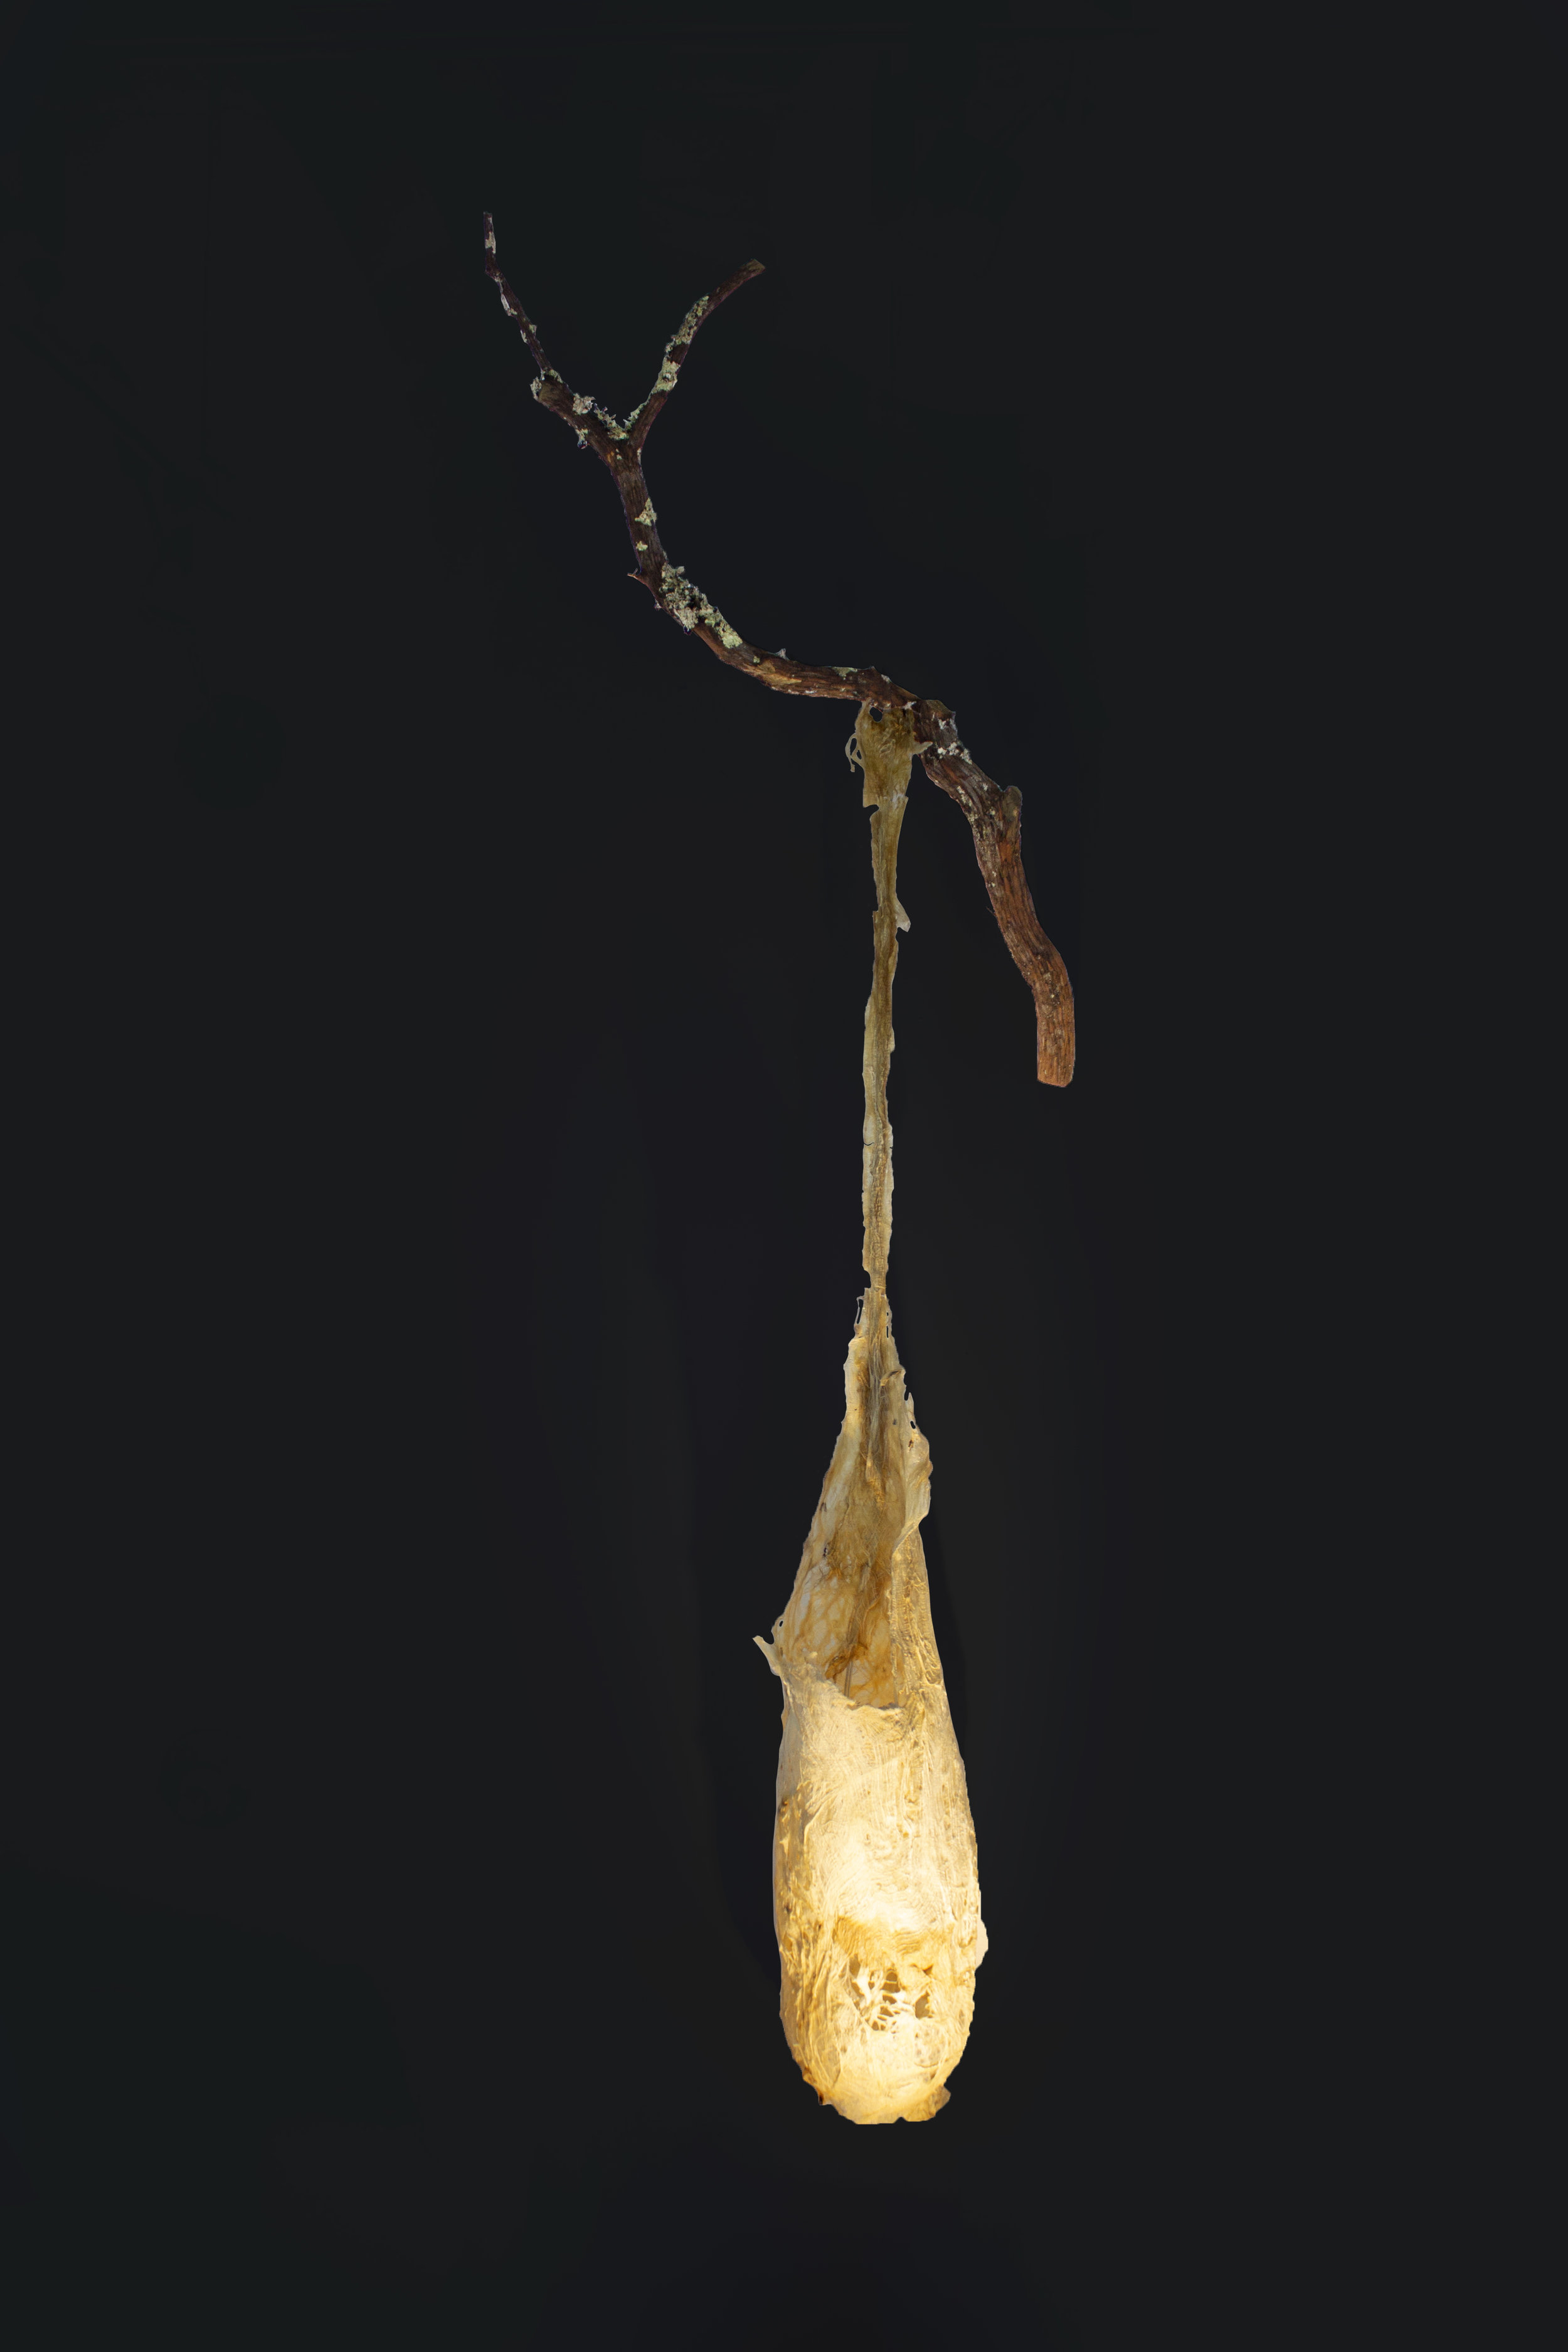  COCOON I, 2017, CAMBIUM FIBER FROM ASIAN MULBERRY TREE, BRACH, AND LED LIGHT, 75”H x 27”W x 10”D, $2,300